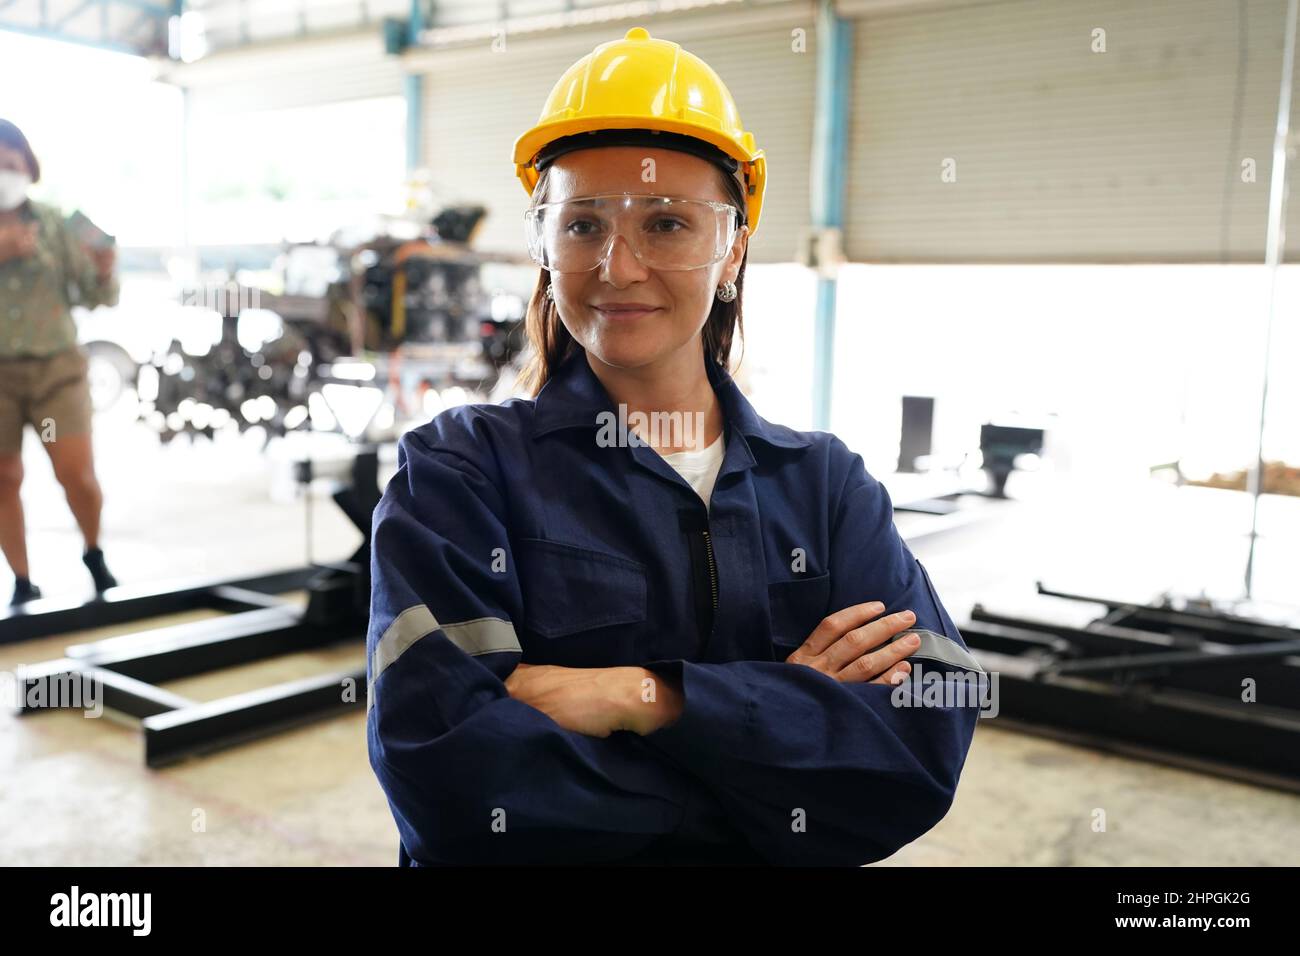 Female industrial worker working with manufacturing equipment in a factory Stock Photo